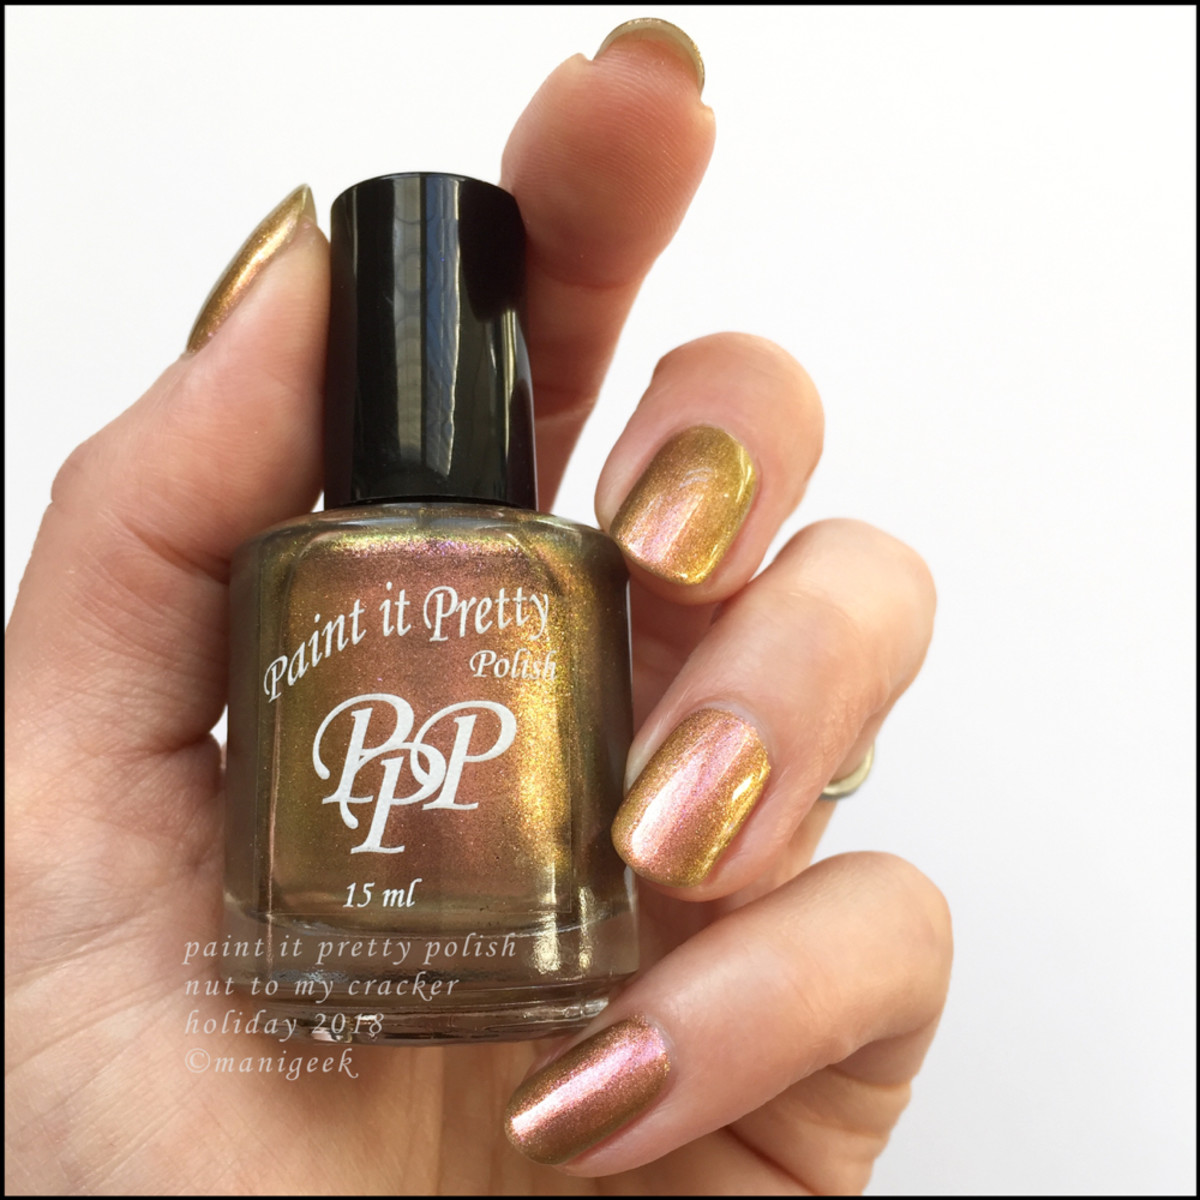 Paint it Pretty Polish Nut to my Cracker - Holiday 2018 Collection